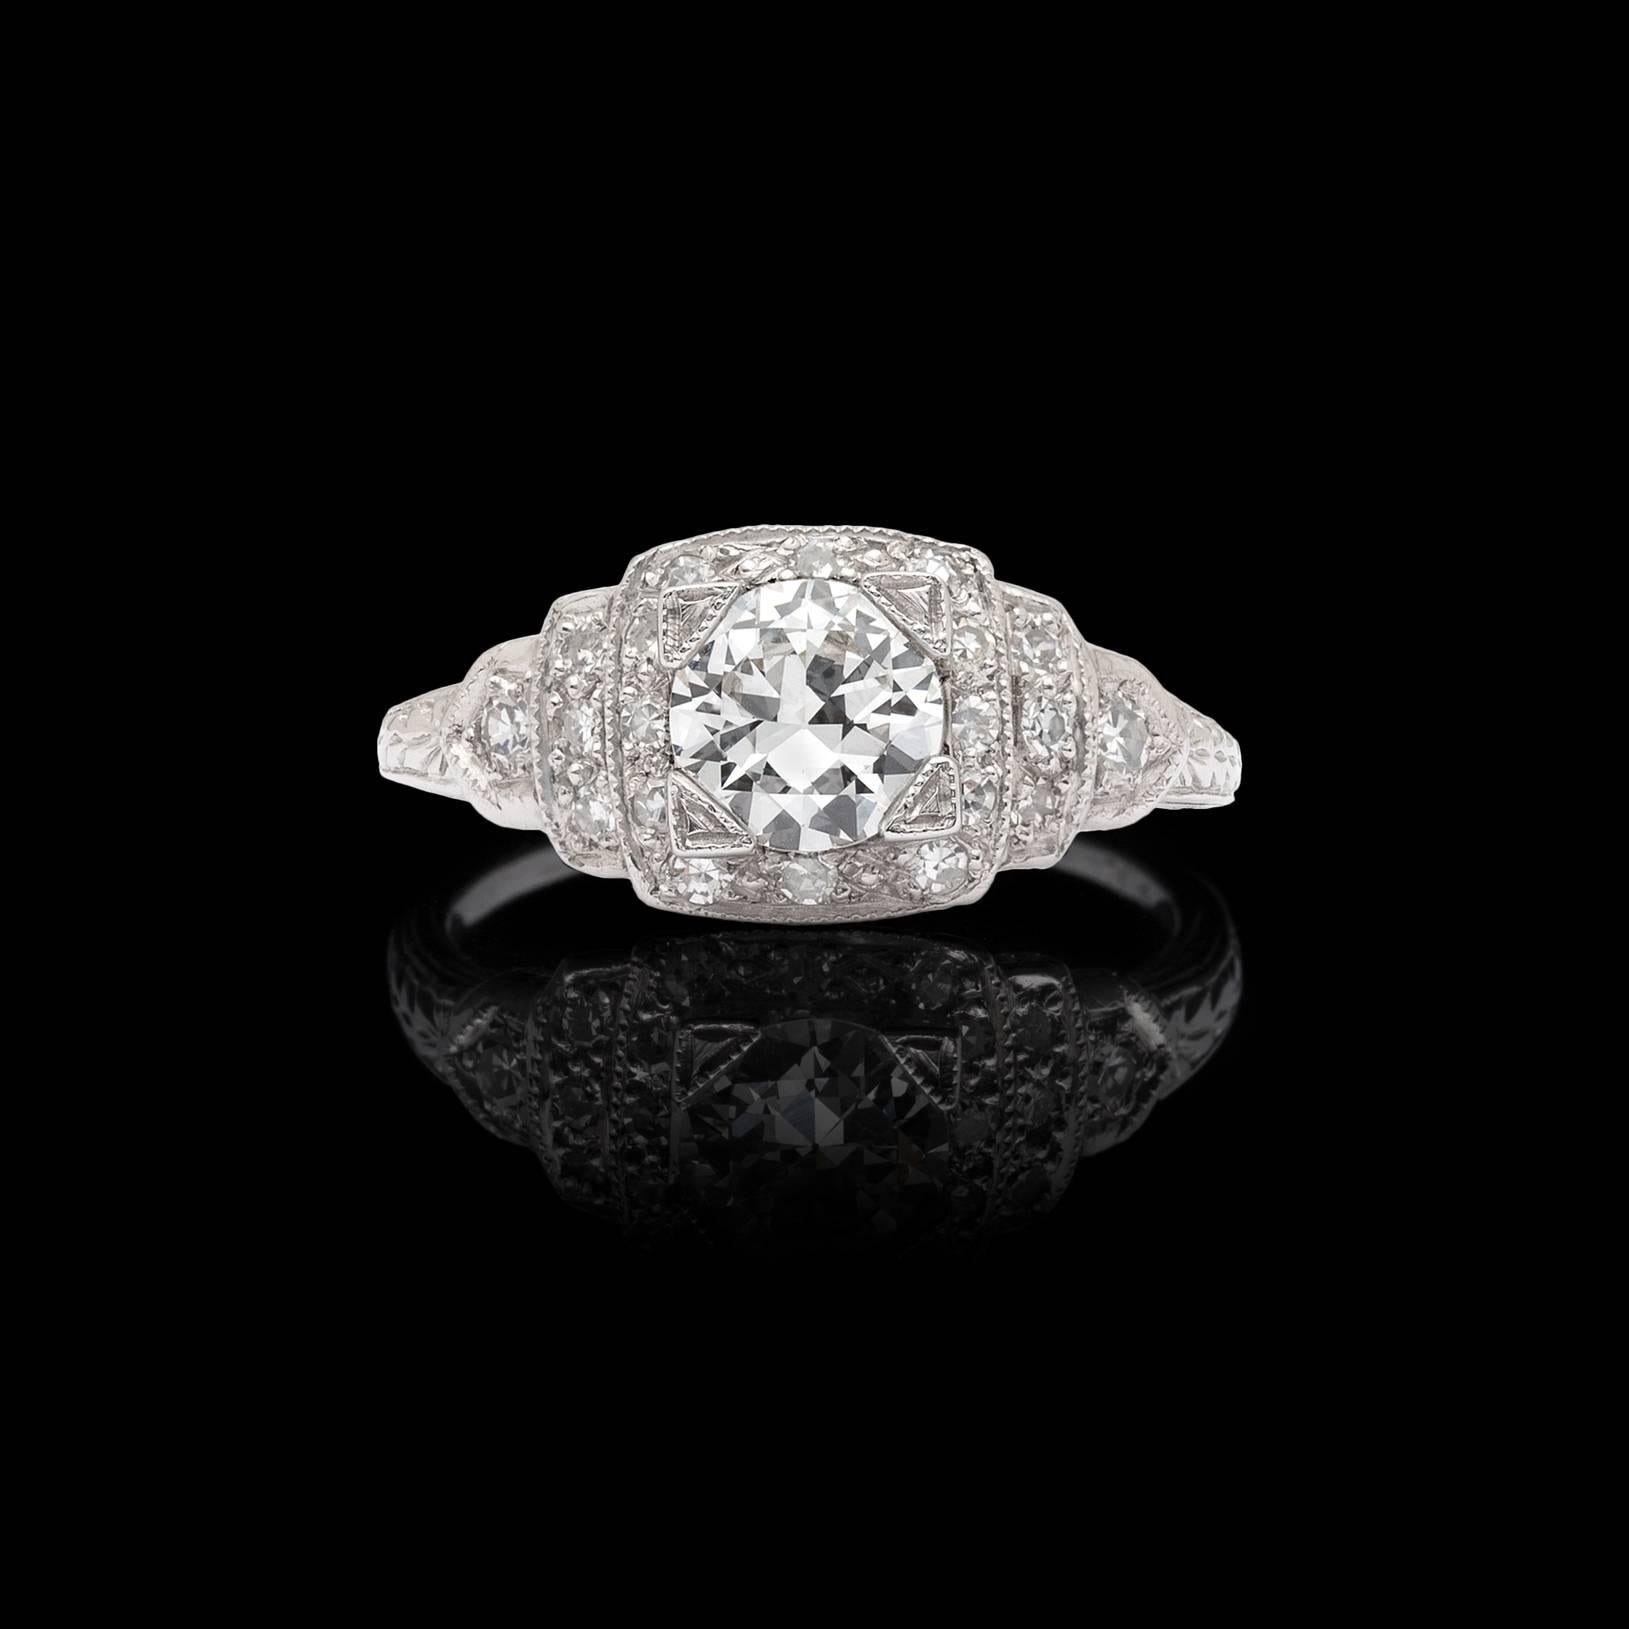 Circa 1950's, the platinum engagement ring features a G/VS2 round brilliant-cut diamond weighing 0.80ct., further accented by single-cut diamonds, for a total weight of 1.05 carats. The ring weighs 4.0 grams, and is currently size 6 3/4, with easy